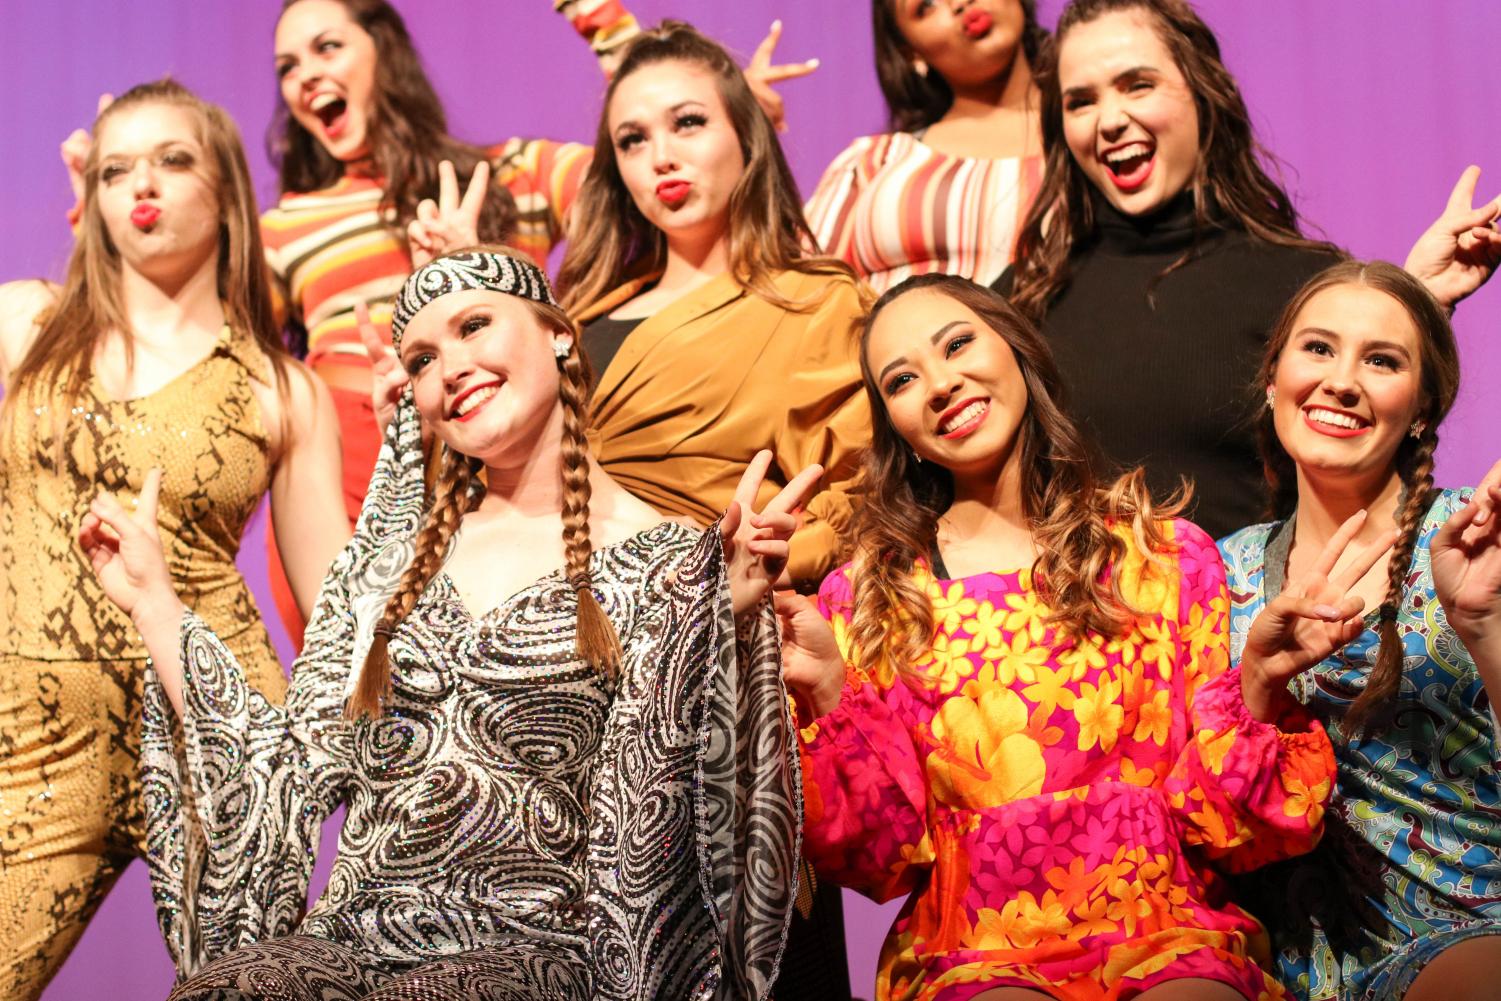 Seniors Maryann Castaneda and Kayley Kraig along with junior Autumn Brown along with other drill team members hold up peace signs to end their dance routine. They performed in attire from the 1960s-1970s era. 